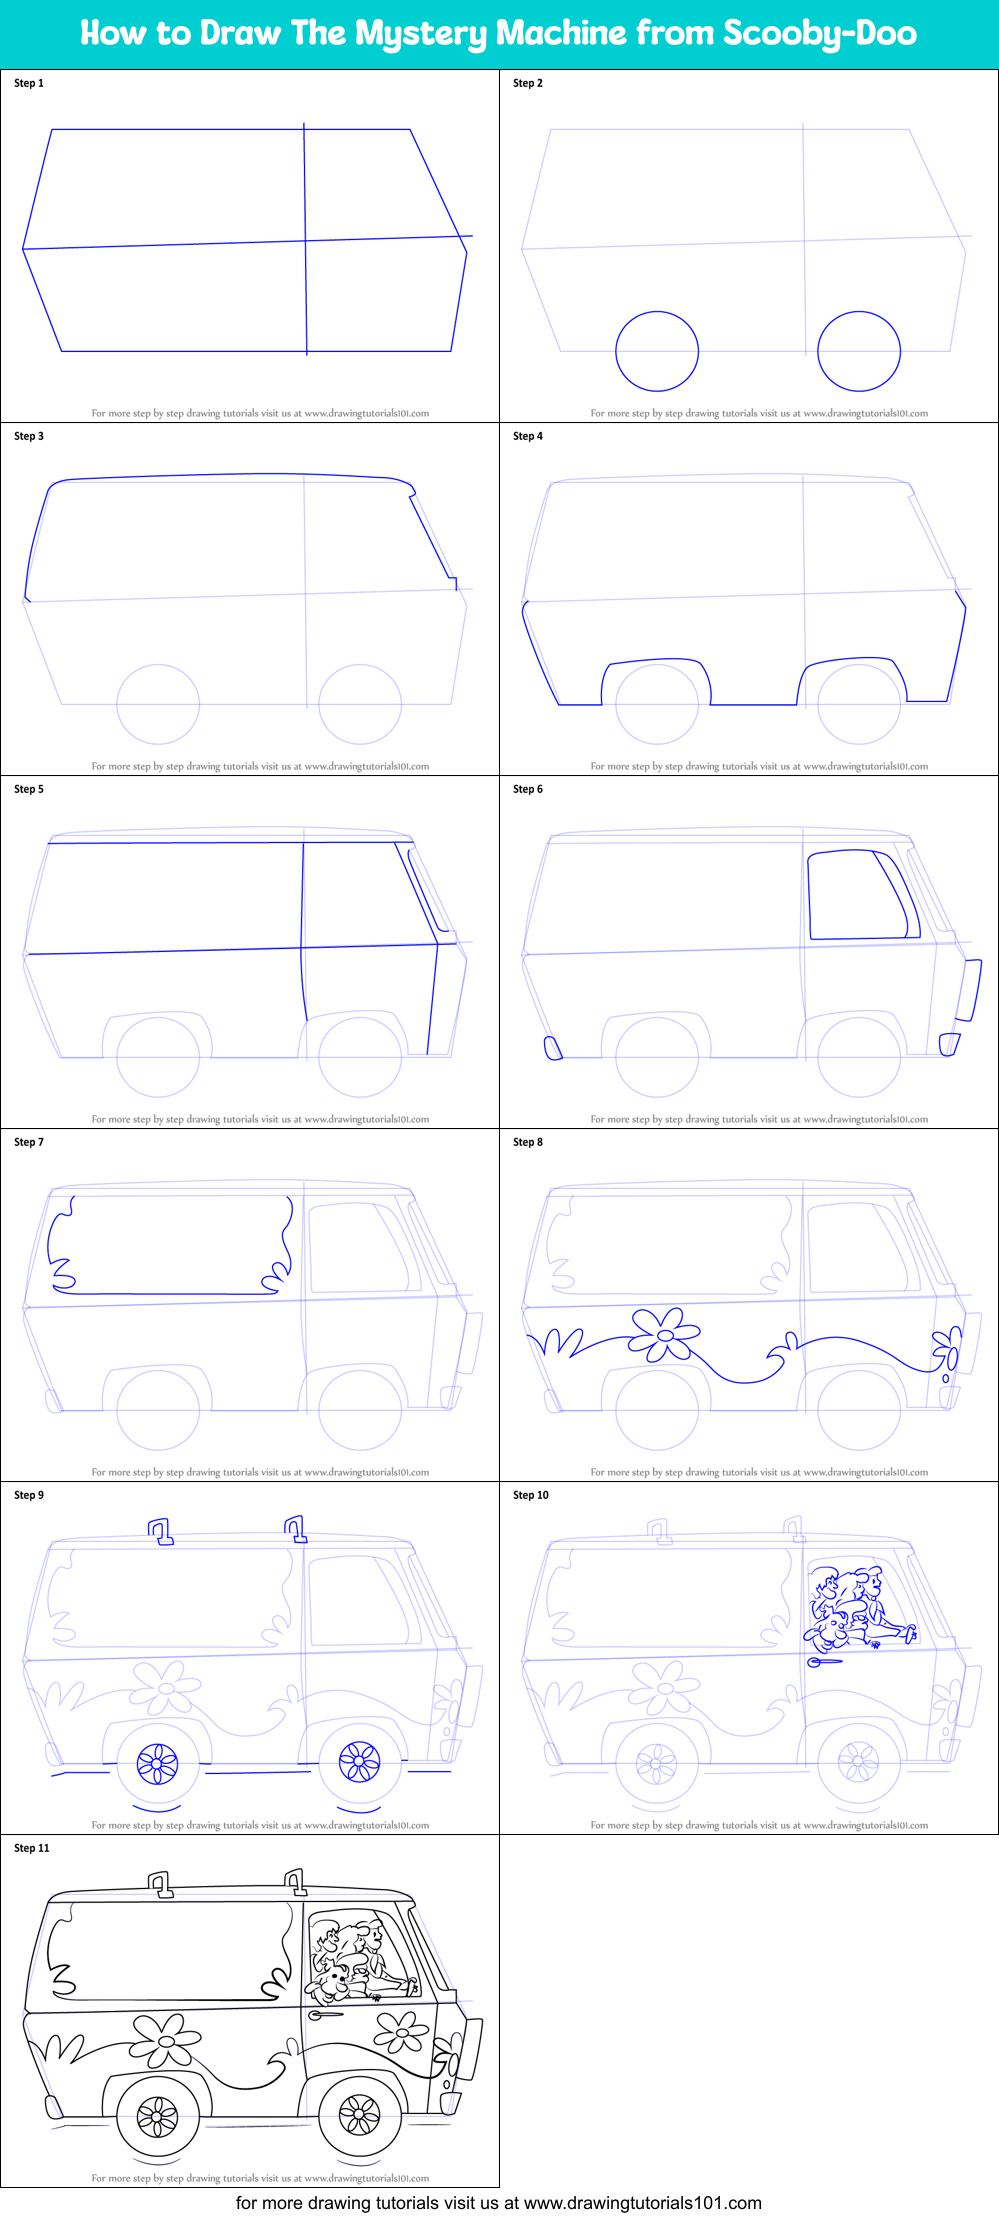 How to Draw The Mystery Machine from Scooby-Doo printable step by step